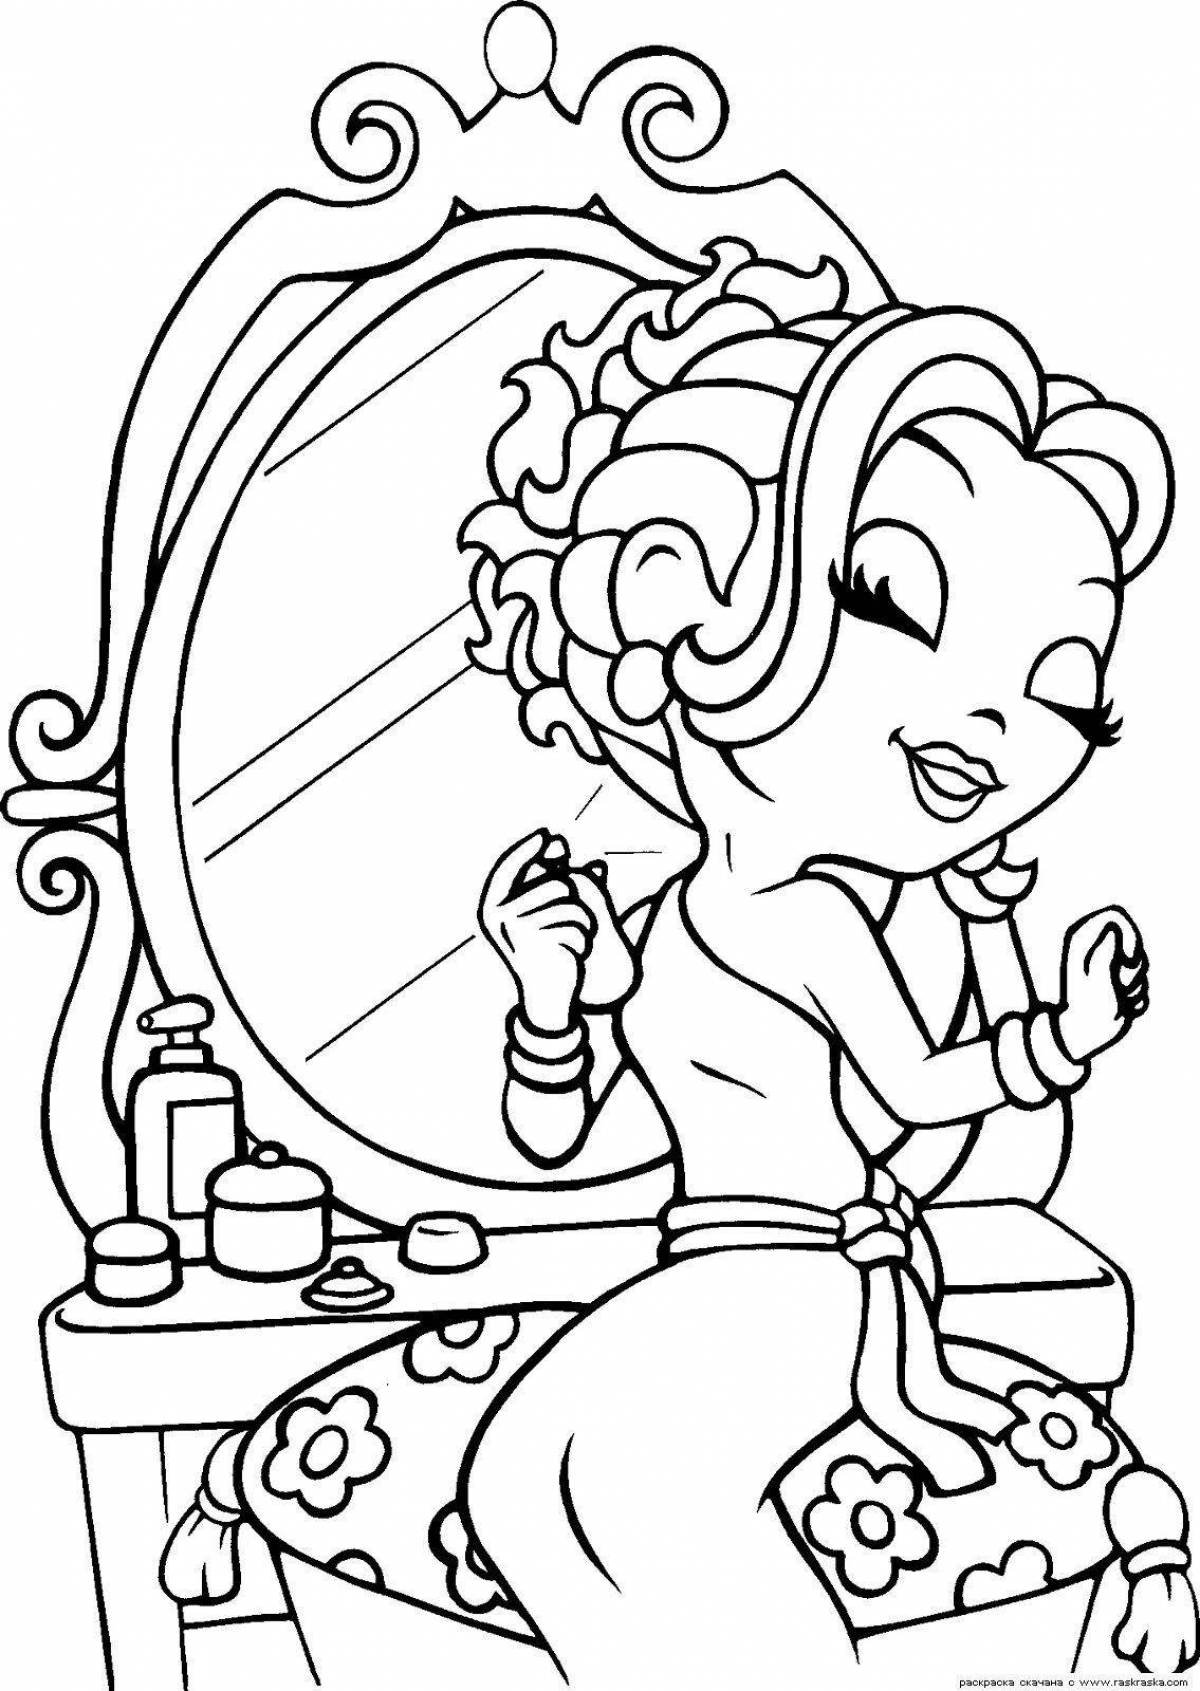 A fun coloring book popular with girls